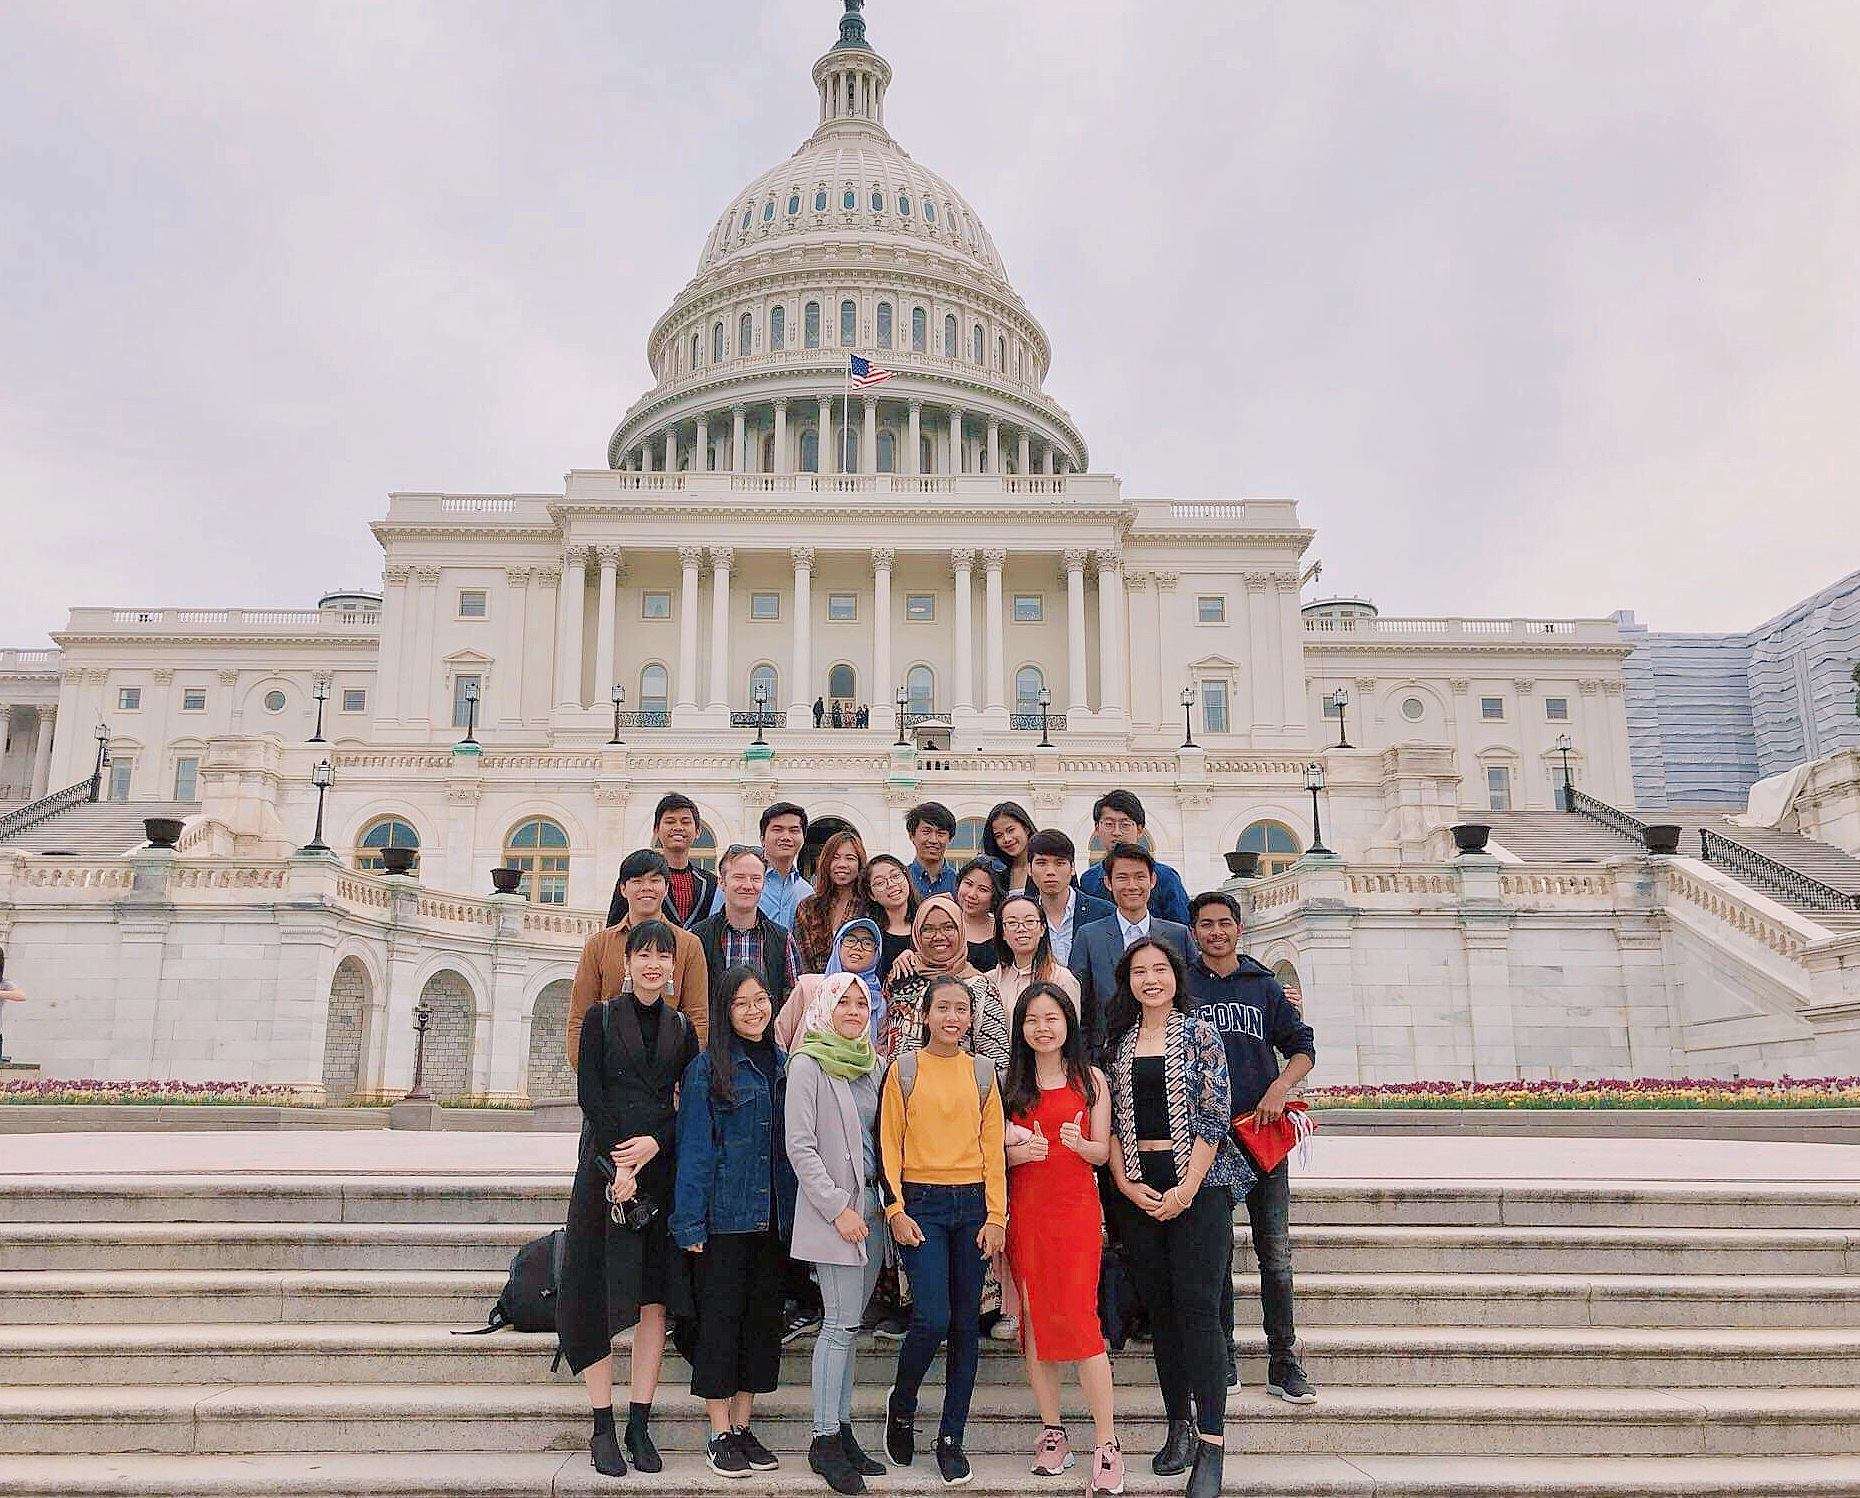 A group photo of the Spring 2019 YSEALI team in front of the Capital building in Washington DC.